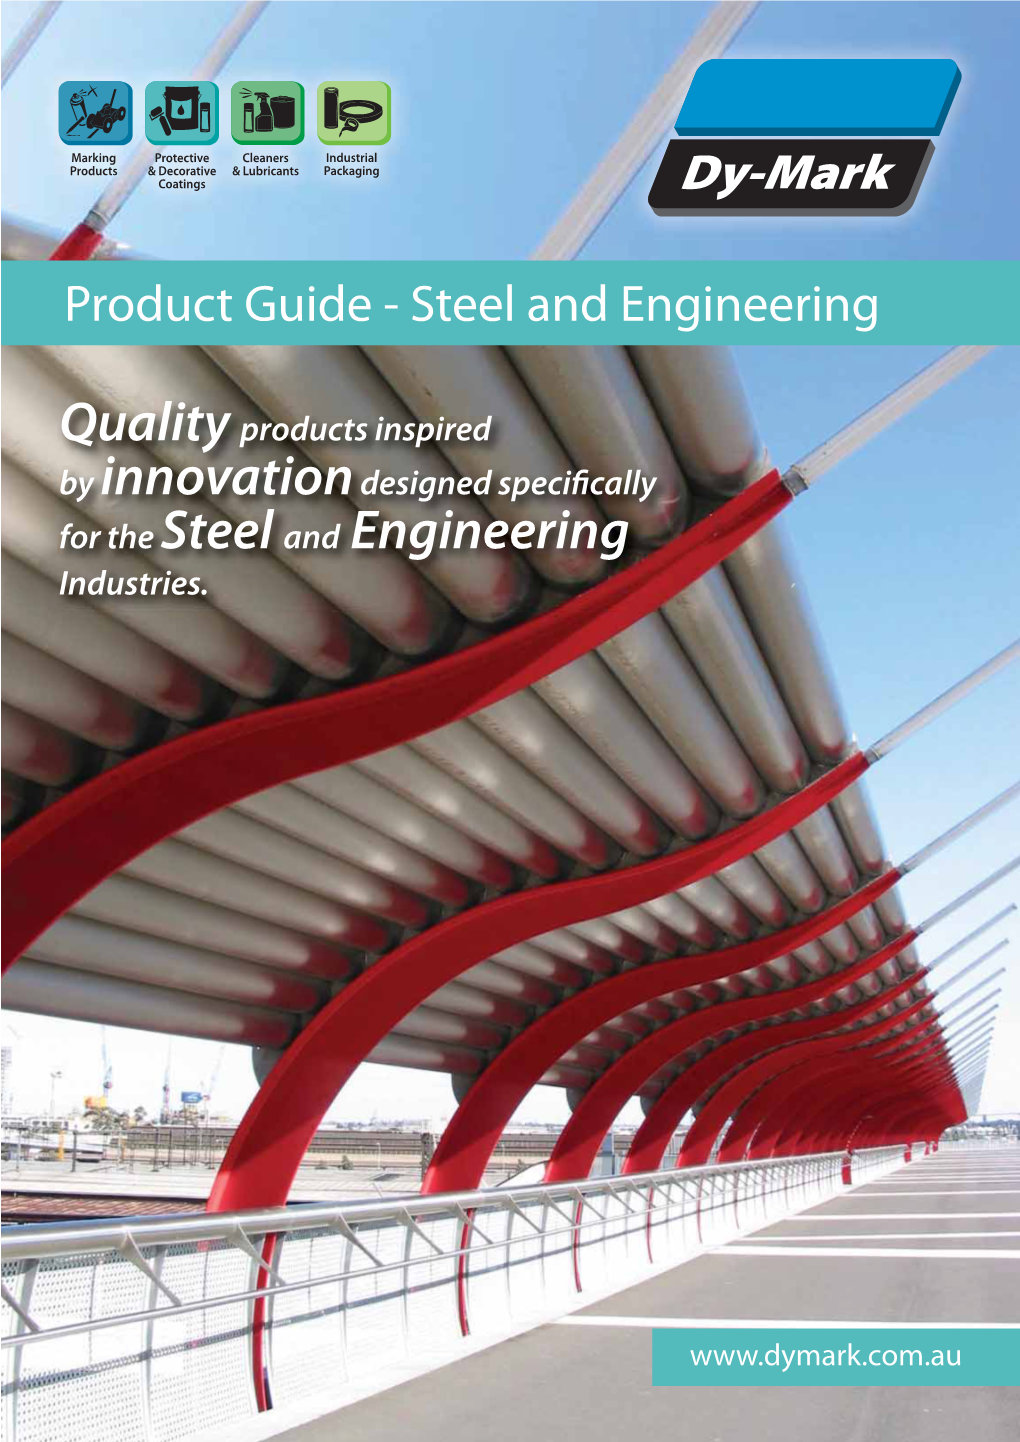 For the Steel and Engineering Industries